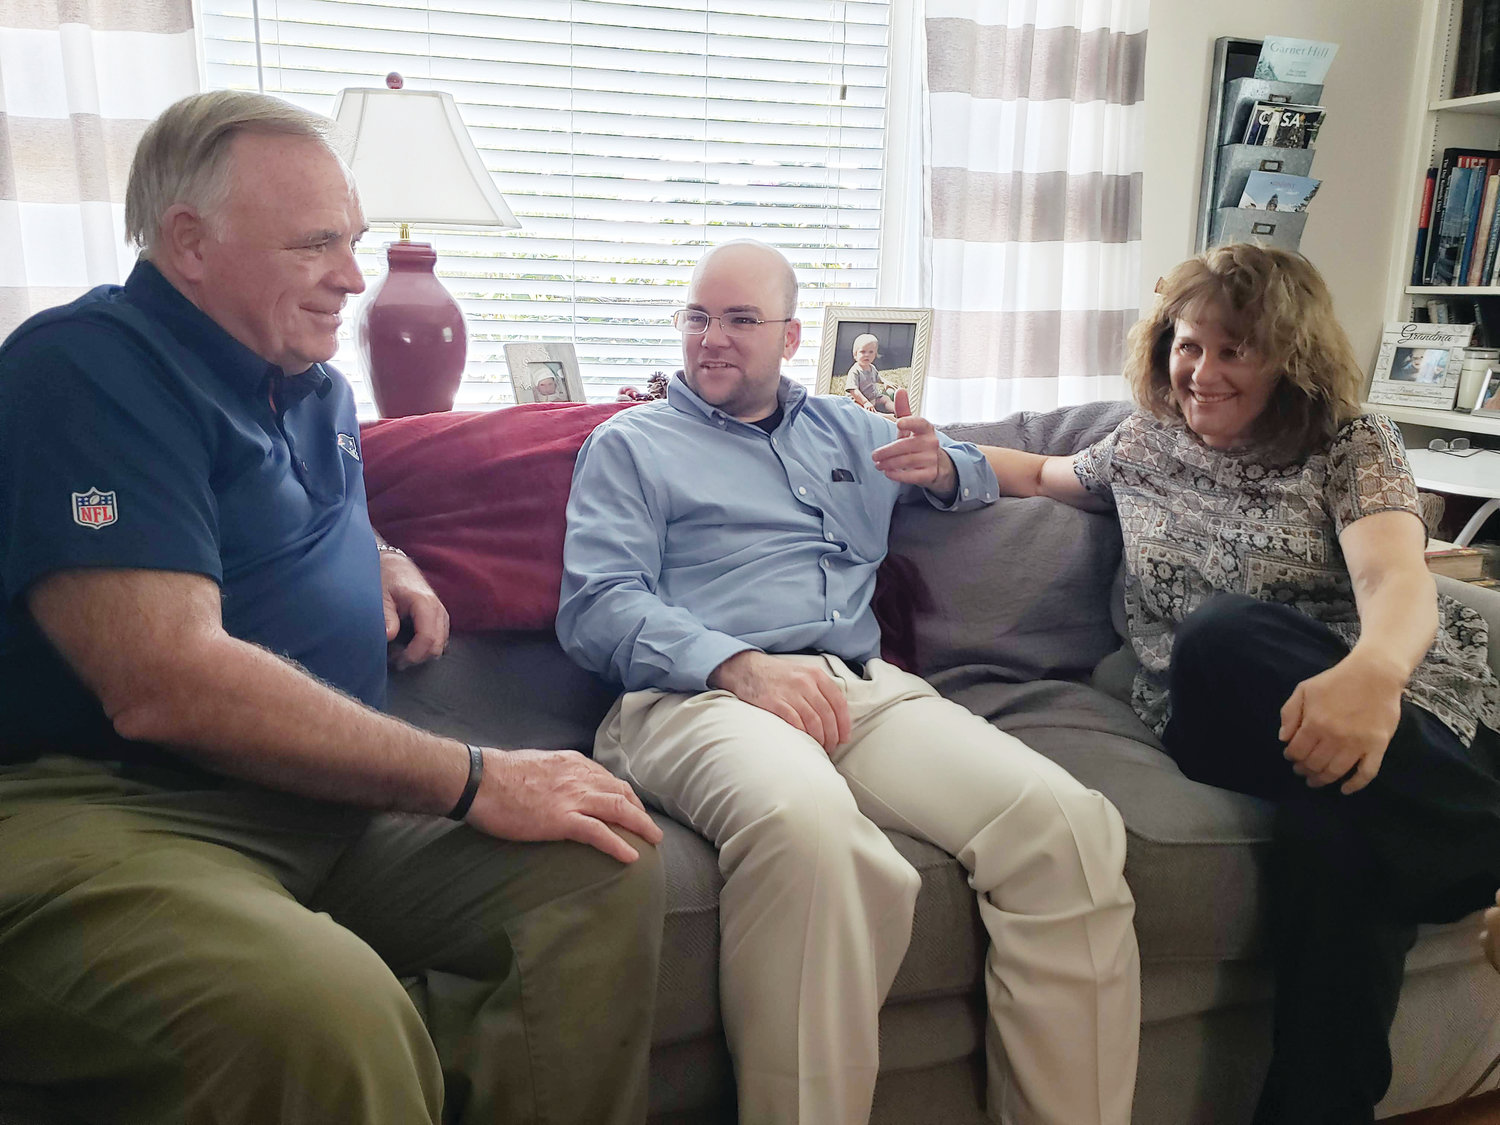 Deacon Brendan Rowley visits with his parents, James and Deborah Rowley, in the family’s Narraganset home a couple of weeks before his ordination.